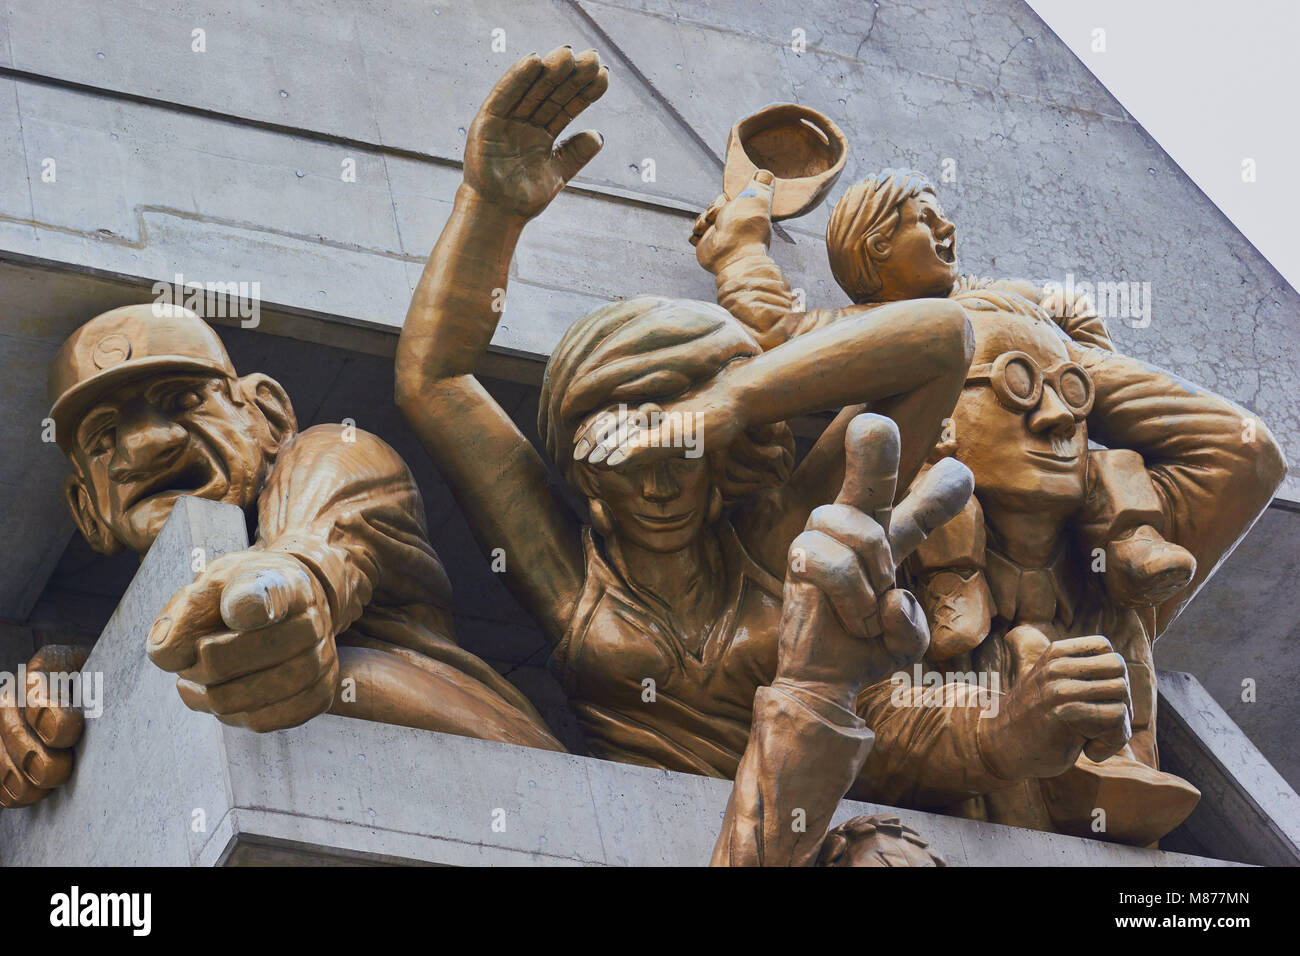 The Audience by Michael Snow, Rogers Centre, downtown Toronto, Ontario, Canada. Stock Photo